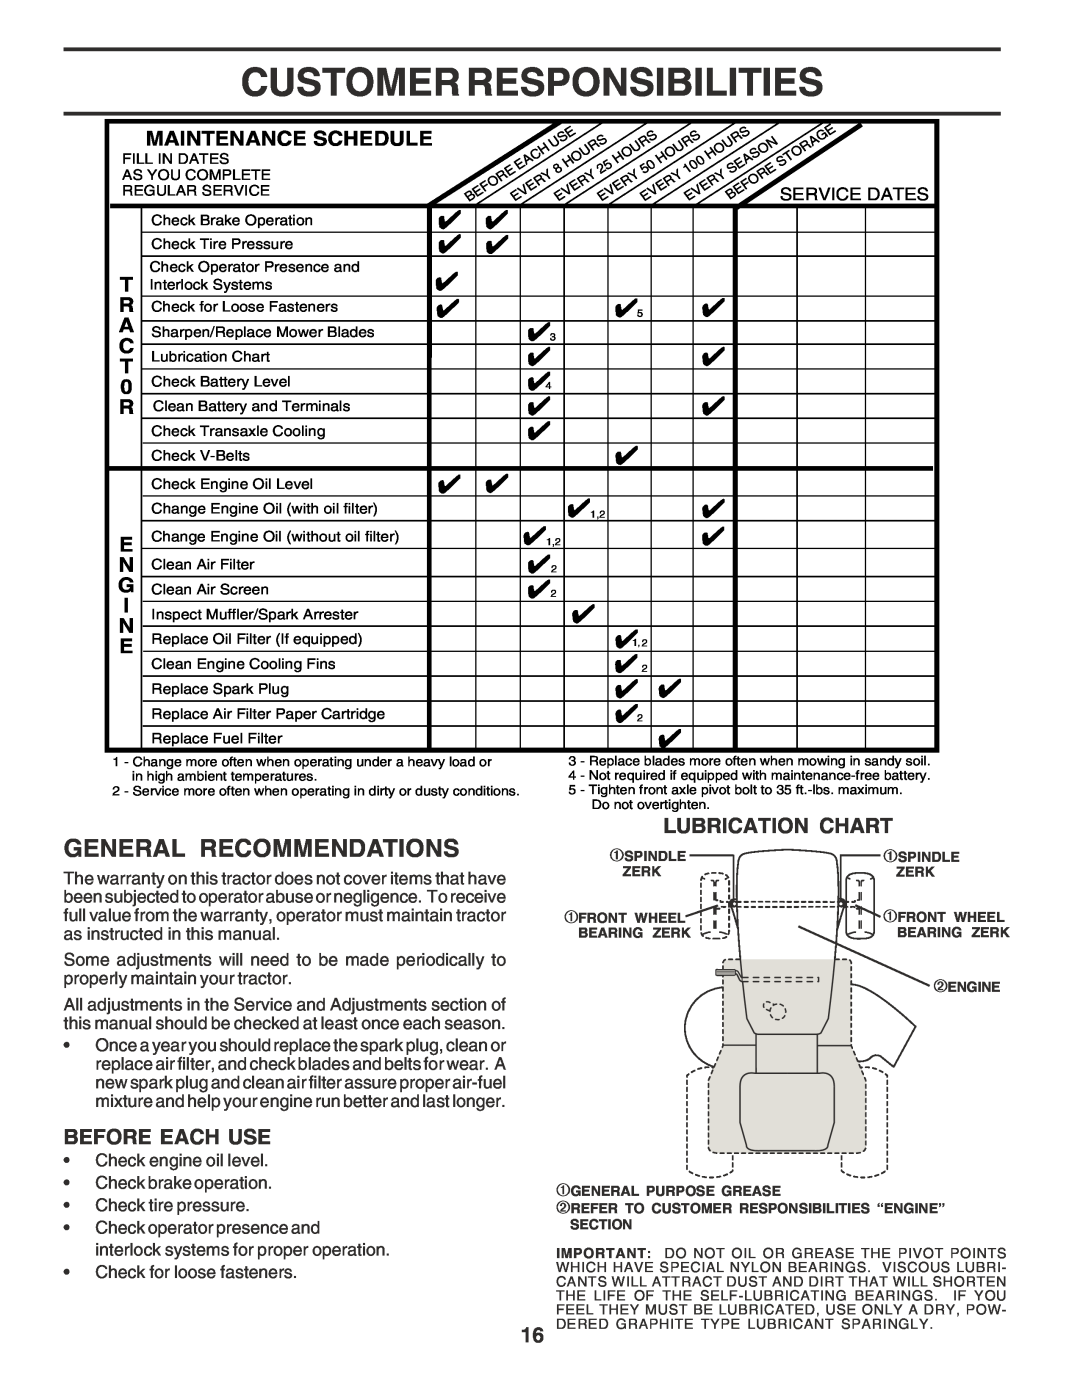 Poulan PR185H42STH owner manual Customer Responsibilities, General Recommendations, Lubrication Chart, Before Each Use 